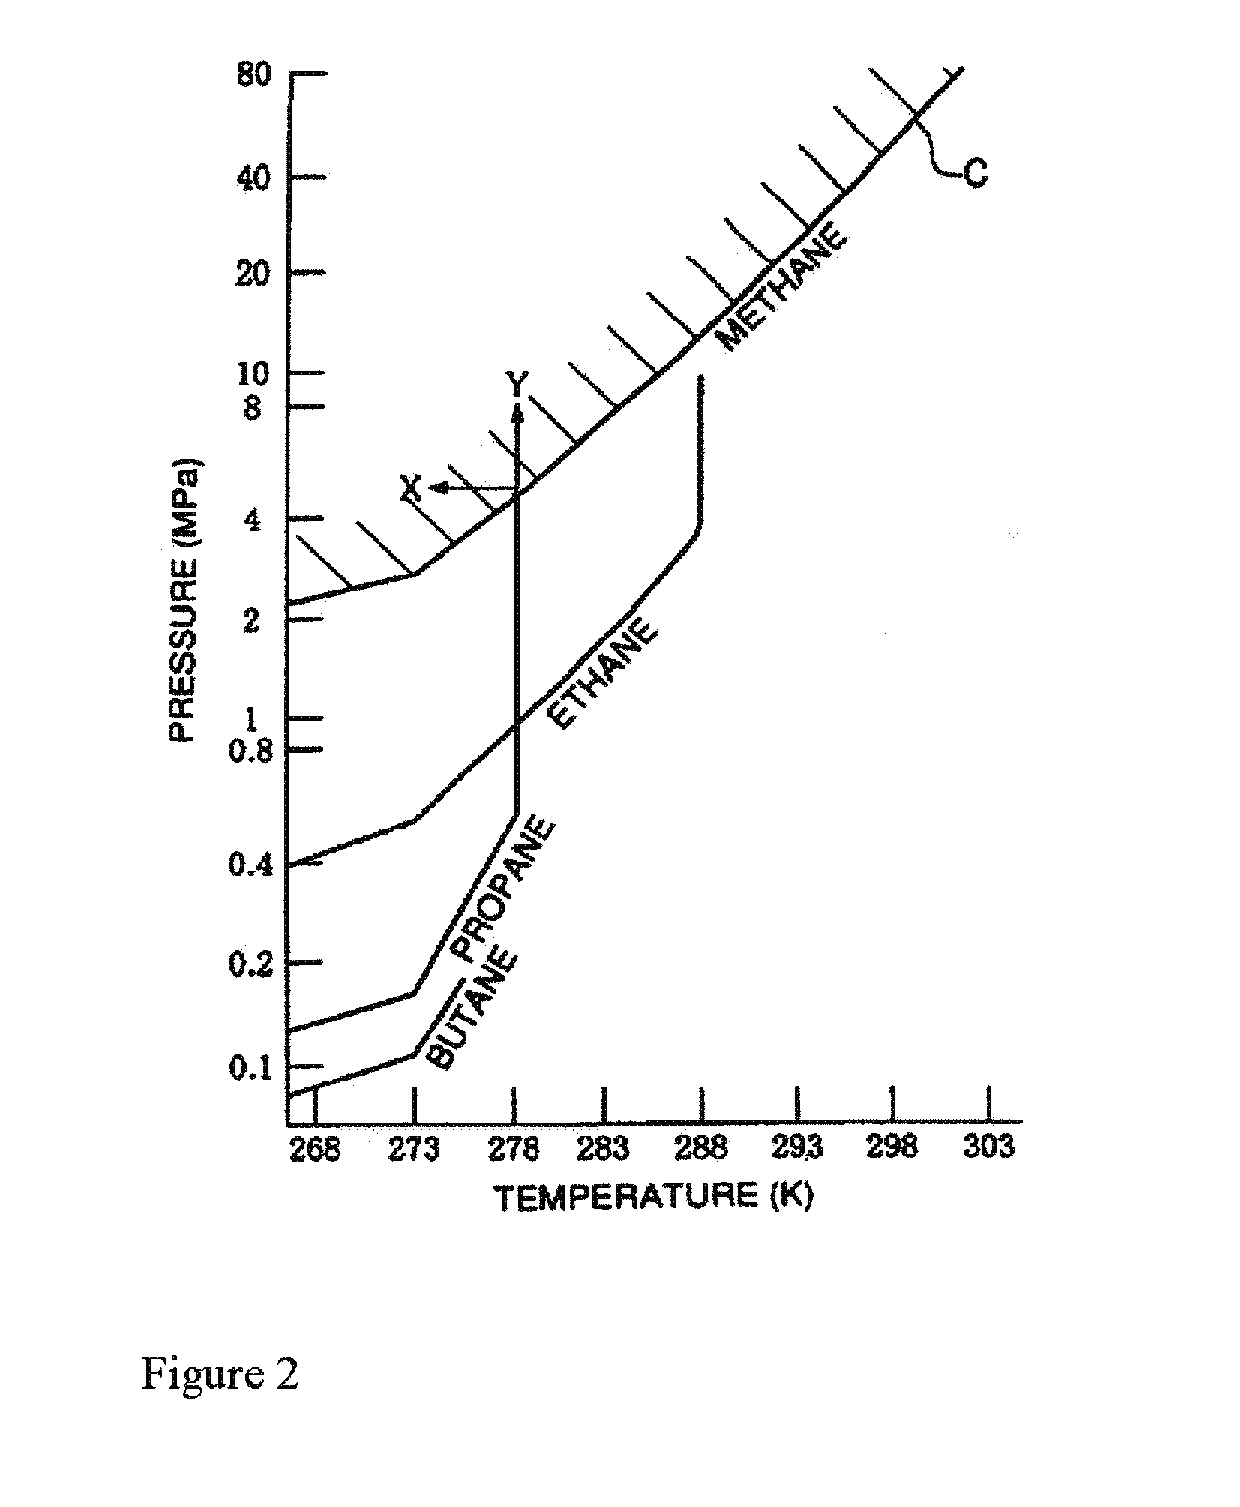 Method and system for extracting stranded gas from underwater environments, converting it to clathrates, and safely transporting it for consumption